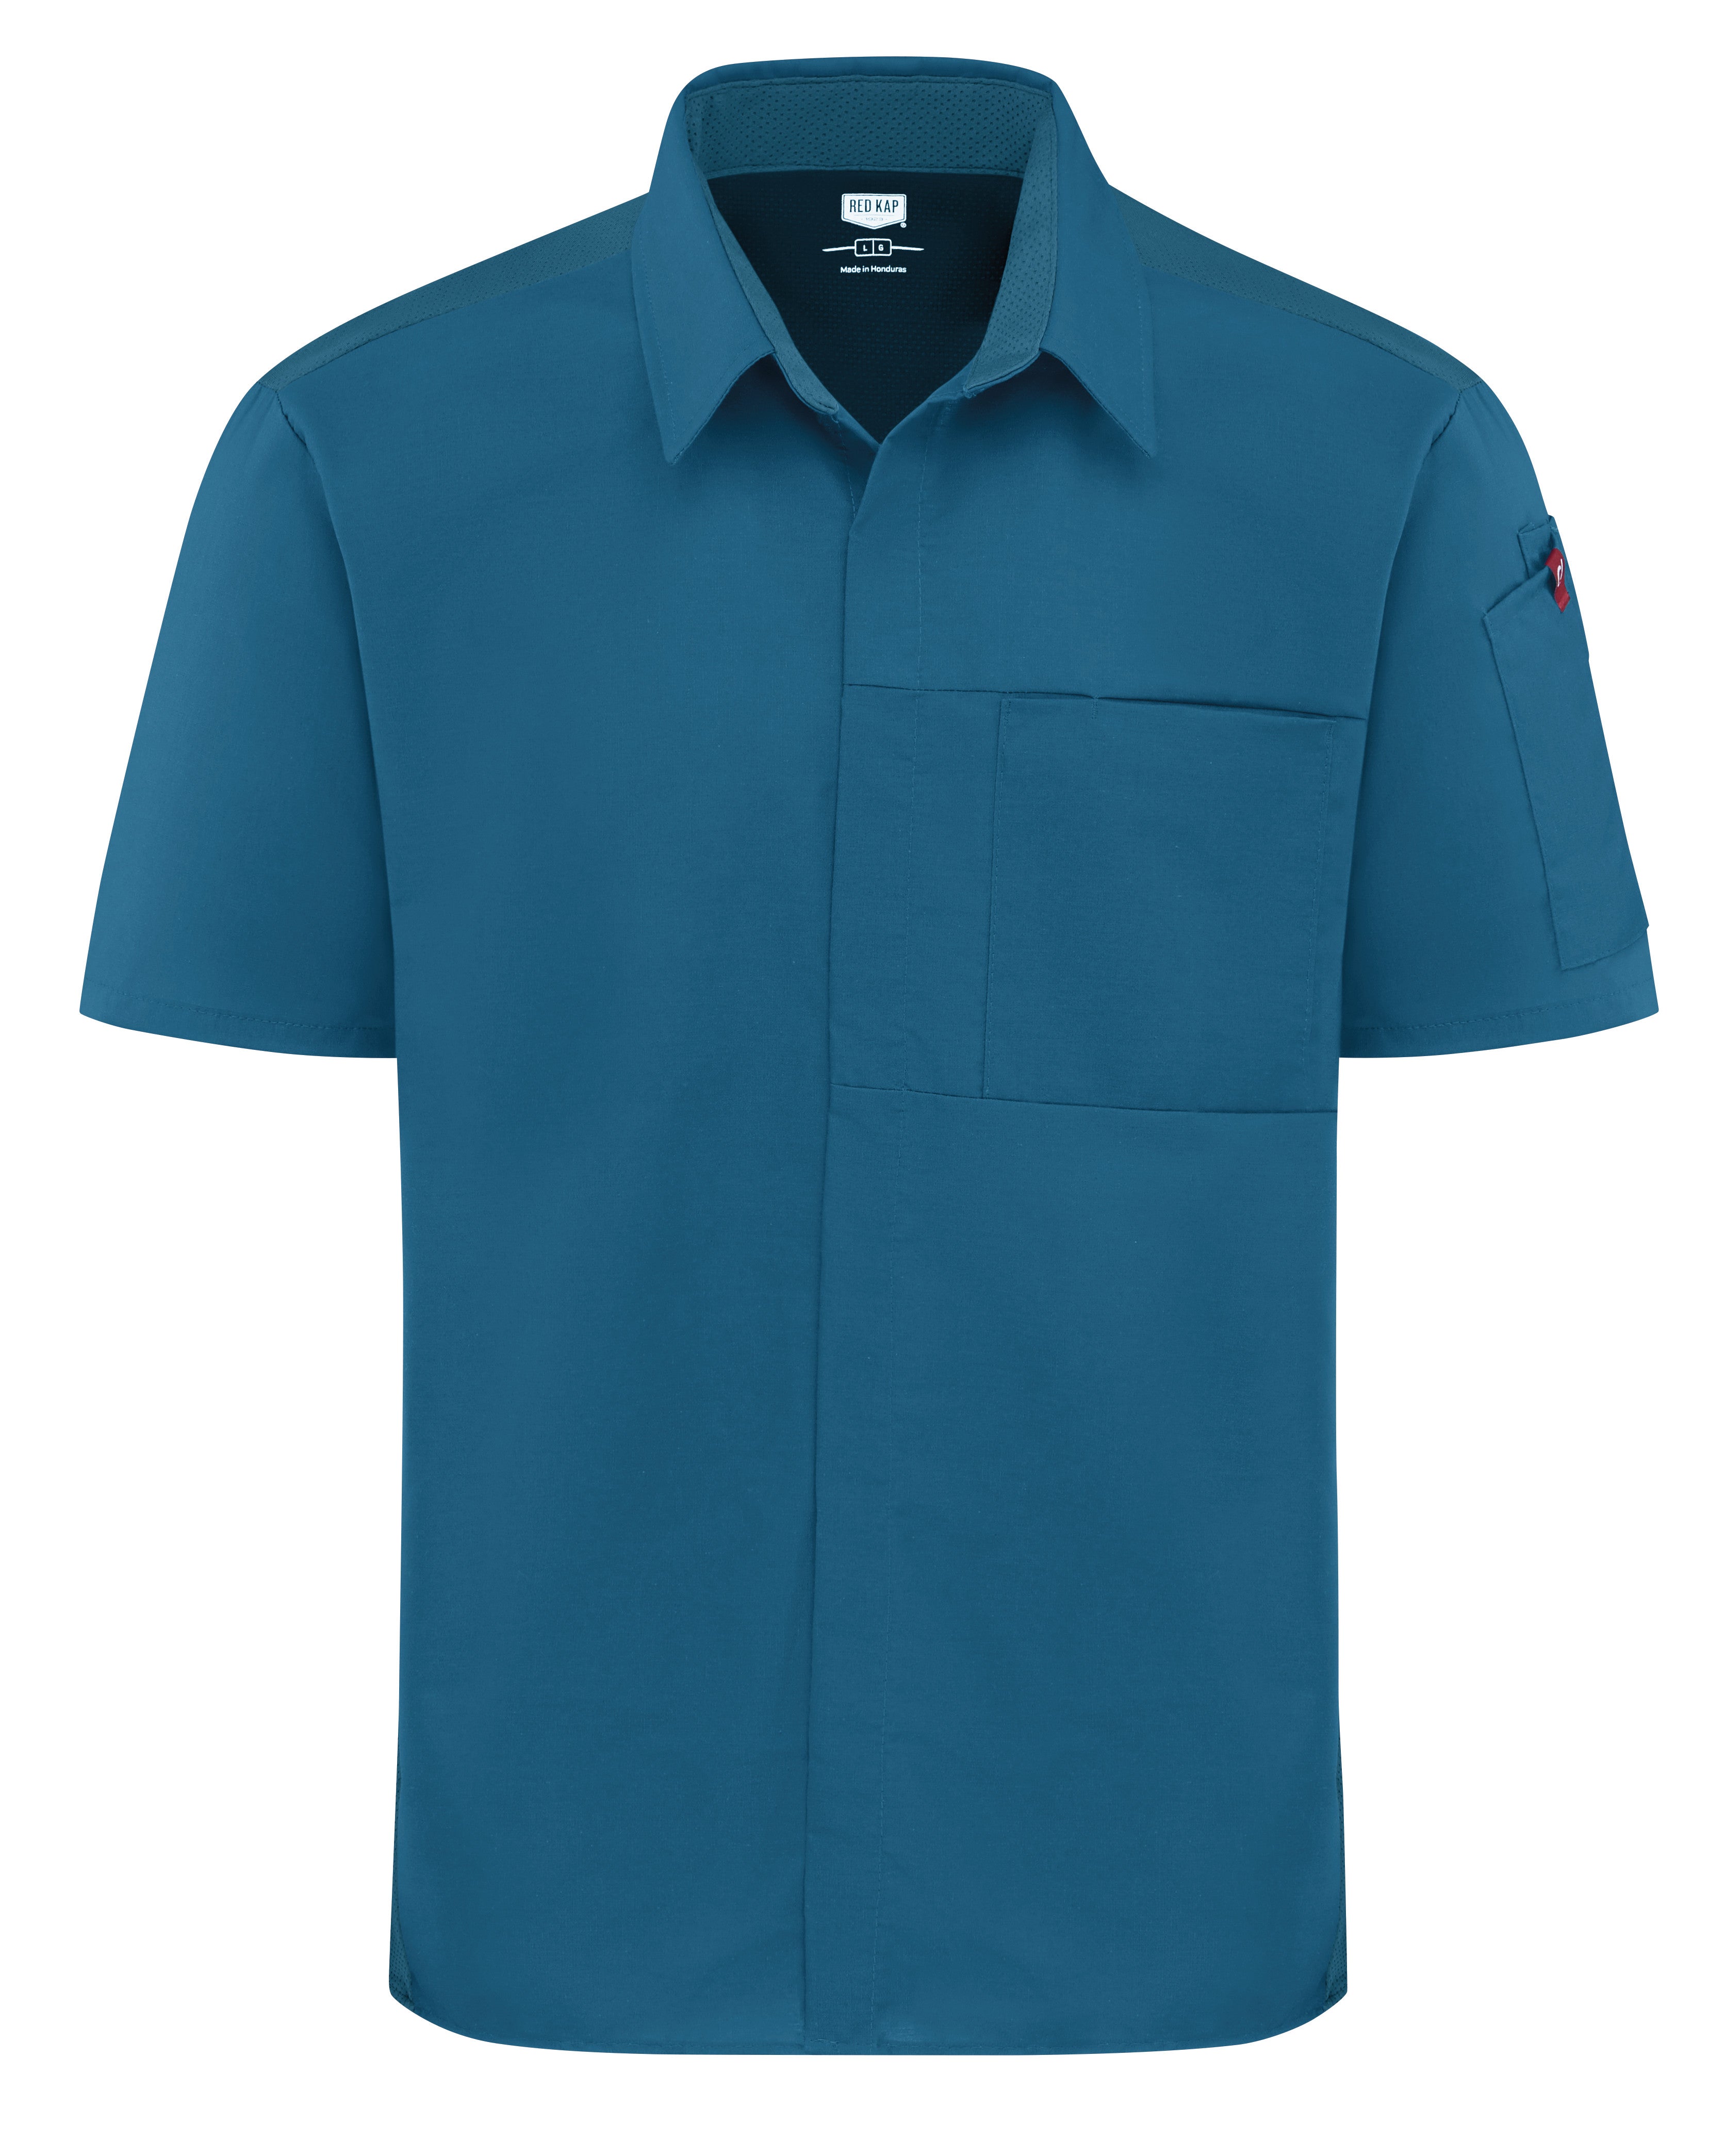 Men's Airflow Cook Shirt with OilBlok 502M - Teal with Teal Mesh-eSafety Supplies, Inc